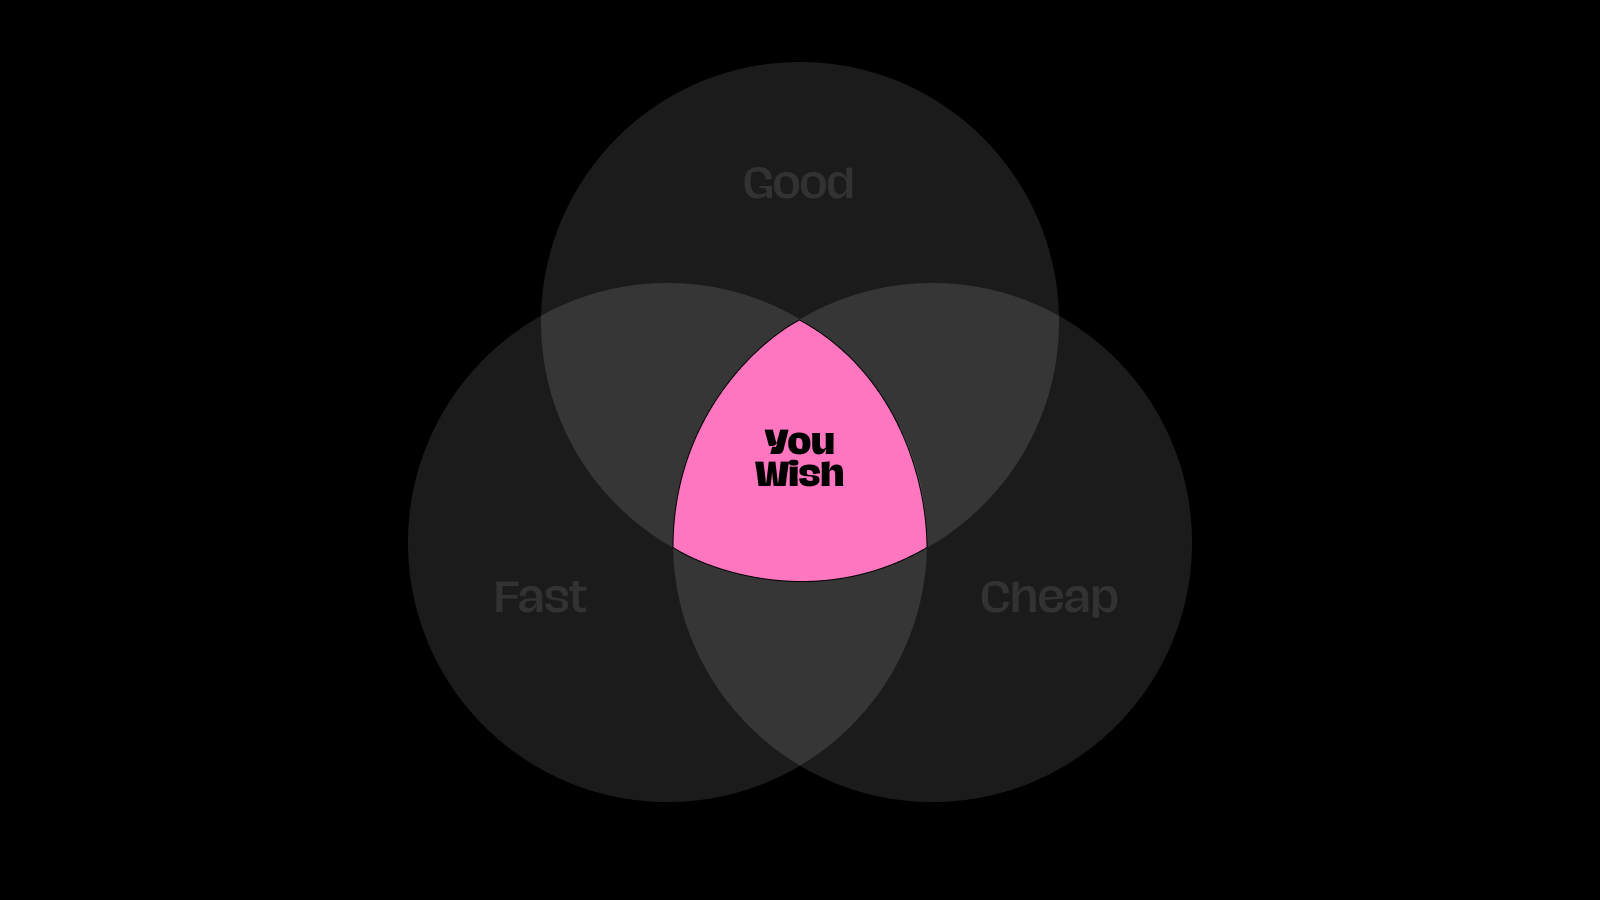 A Venn diagram of three circles: Good, Fast, and Cheap. The combination is You Wish.